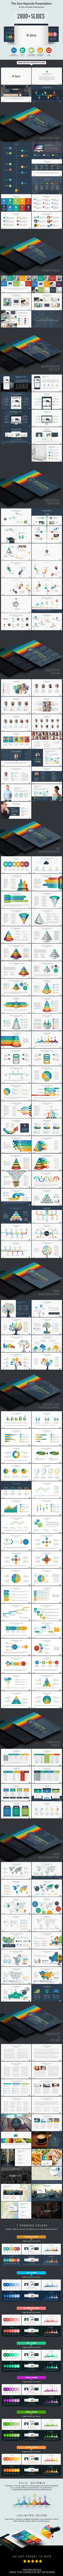 Multipurpose 20business 20powerpoint 20presentation image 20preview